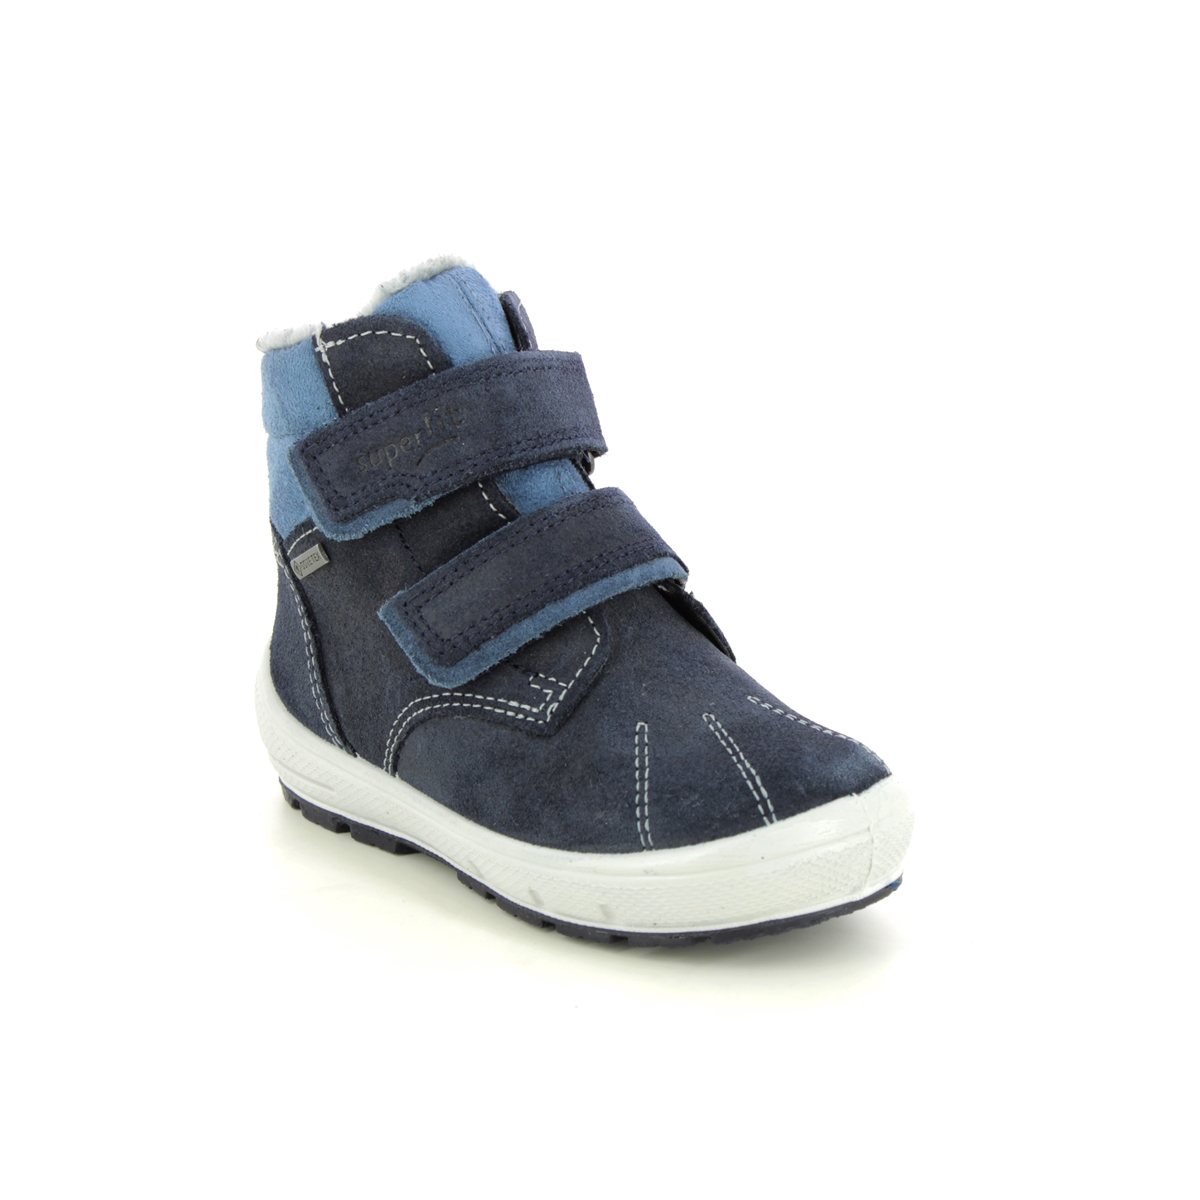 Superfit Groovy Gtx Navy Light Blue Kids Toddler Boys Boots 1006317-8000 in a Plain Leather in Size 29